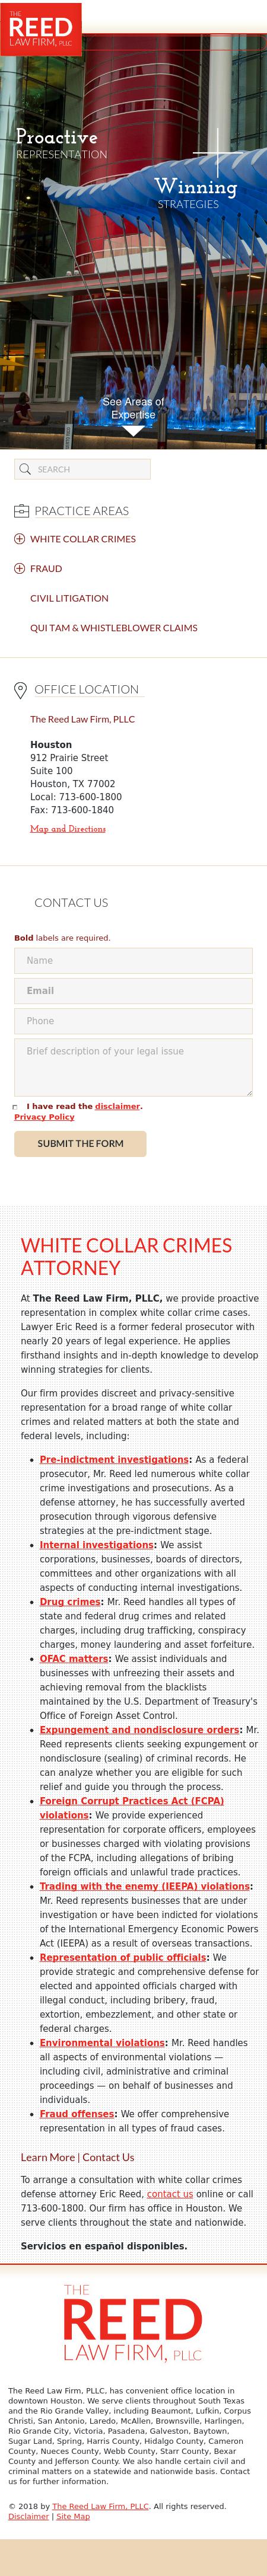 The Reed Law Firm, PLLC - Houston TX Lawyers